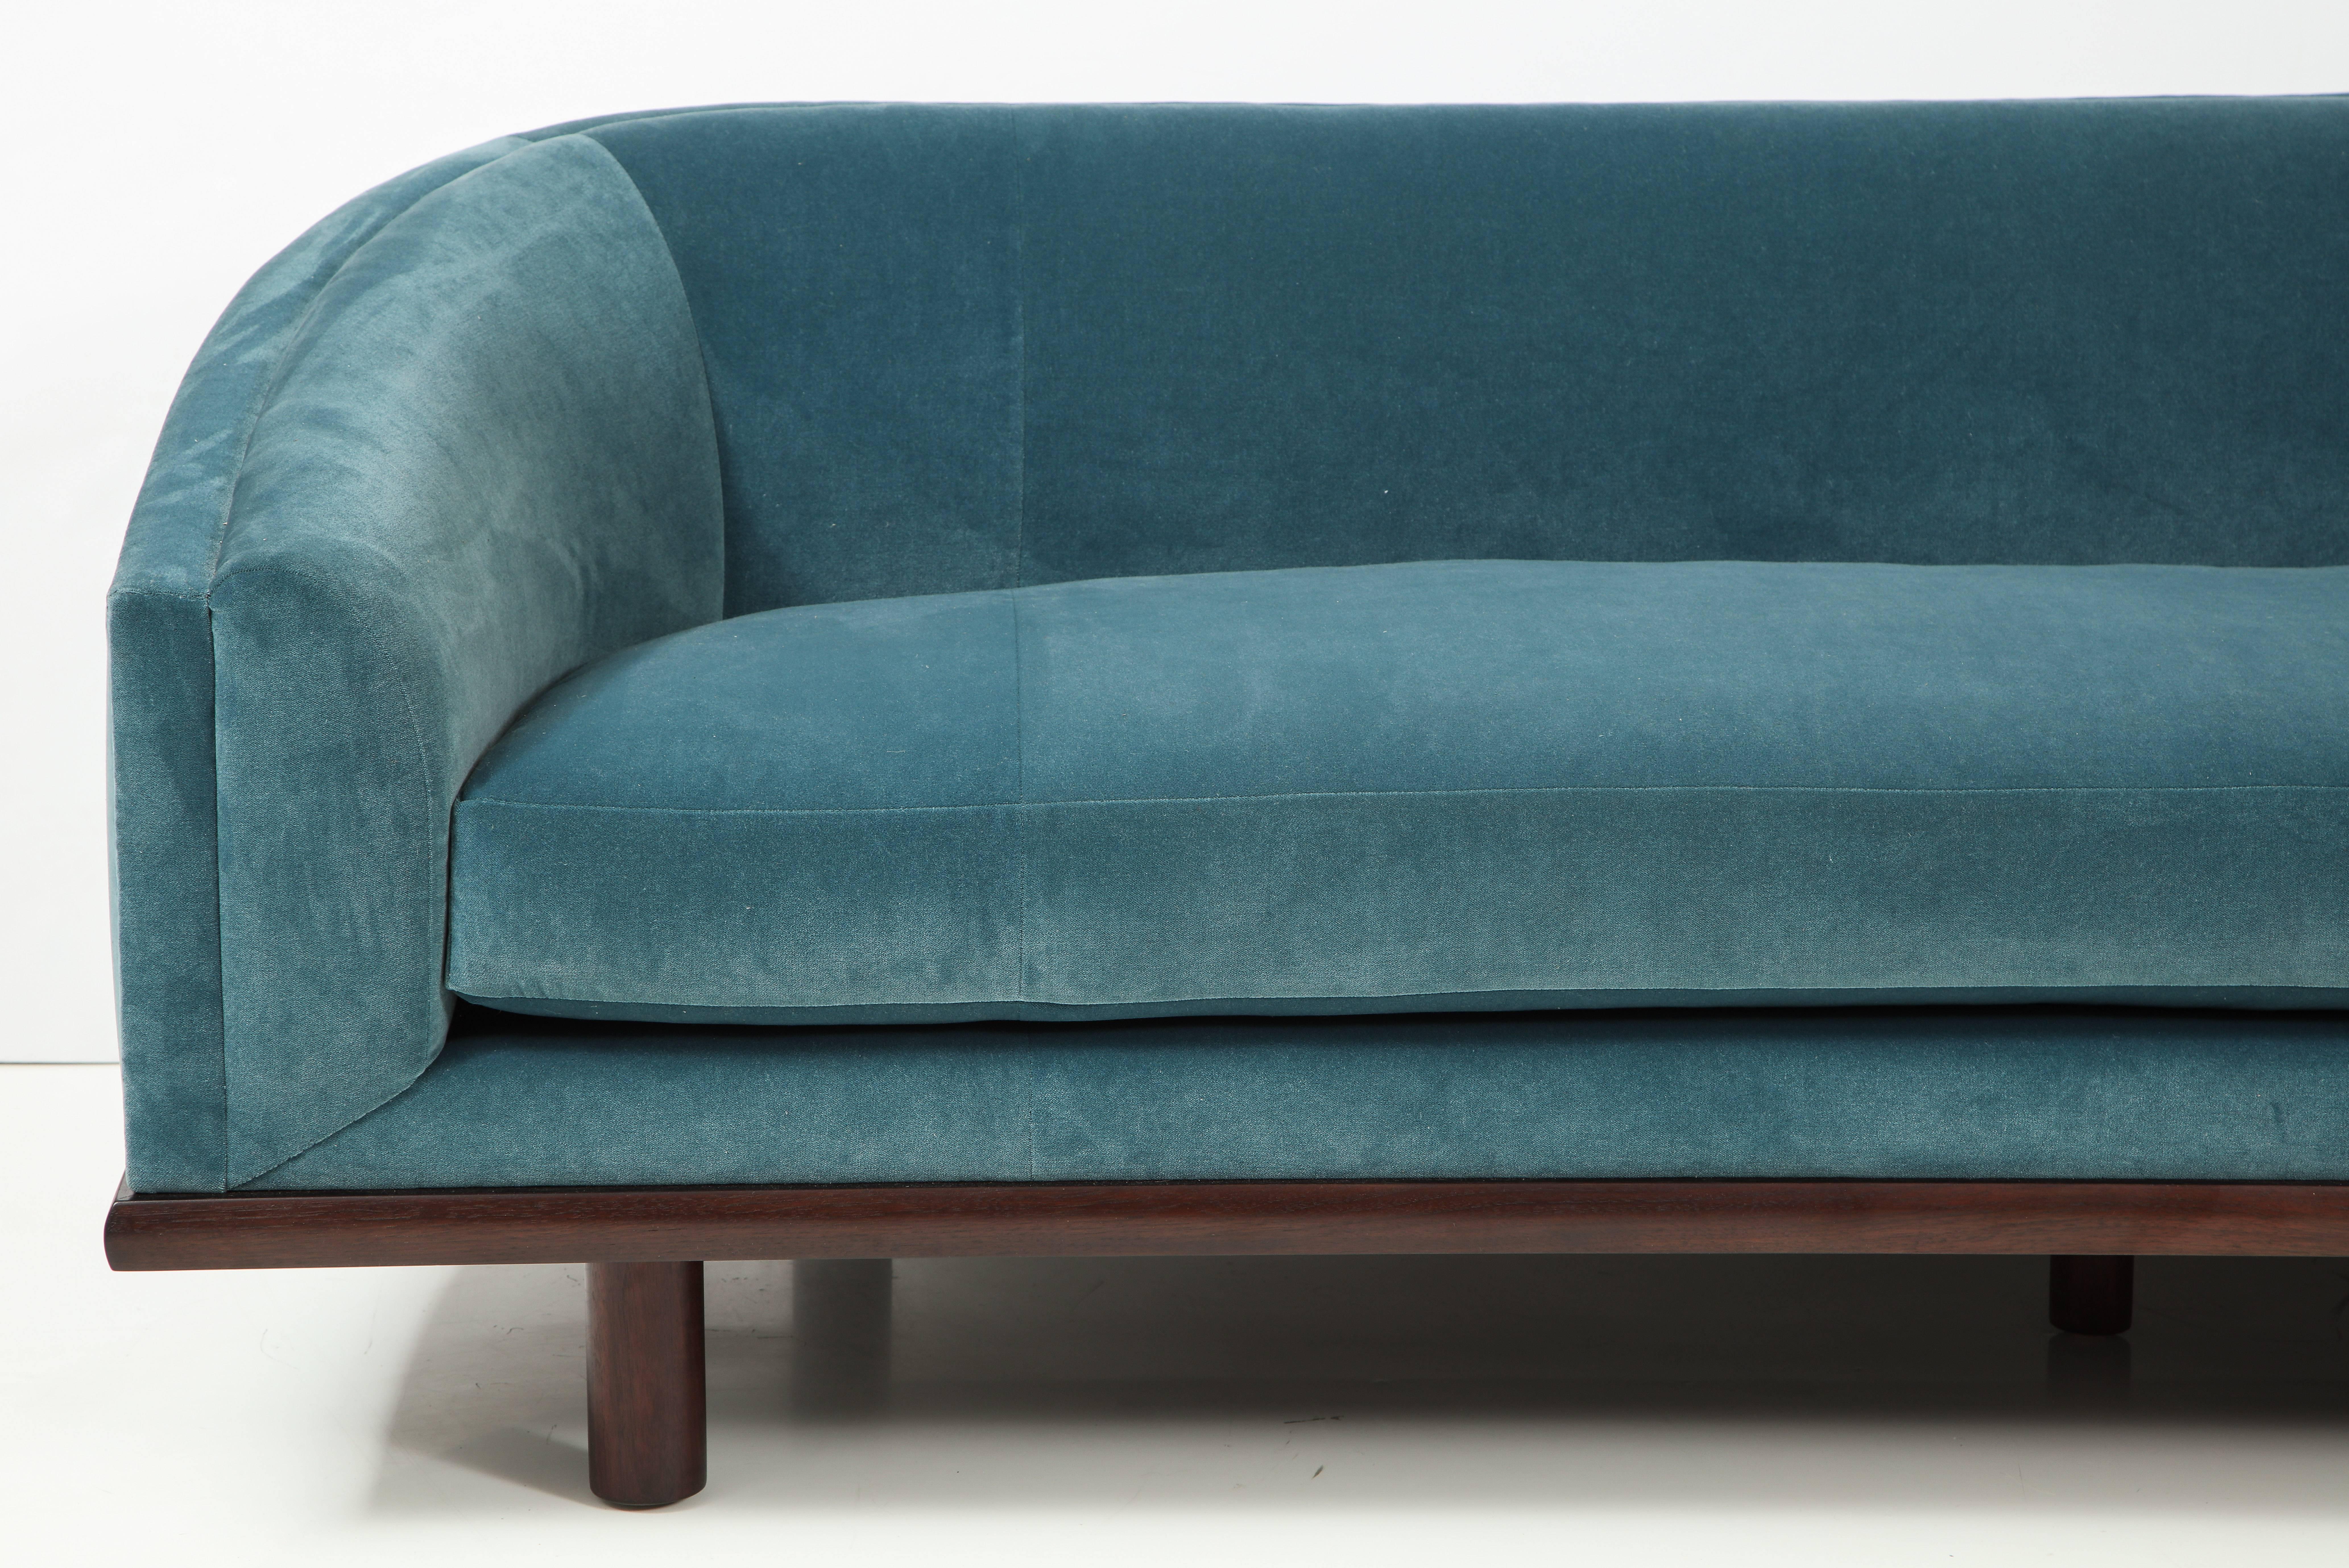 Elegant tight back sofa with curved silhouette and long single seat cushion on solid wood framed base and Classic minimal cylinder legs. The sofa is upholstered in a teal blue velvet with a mahogany base.